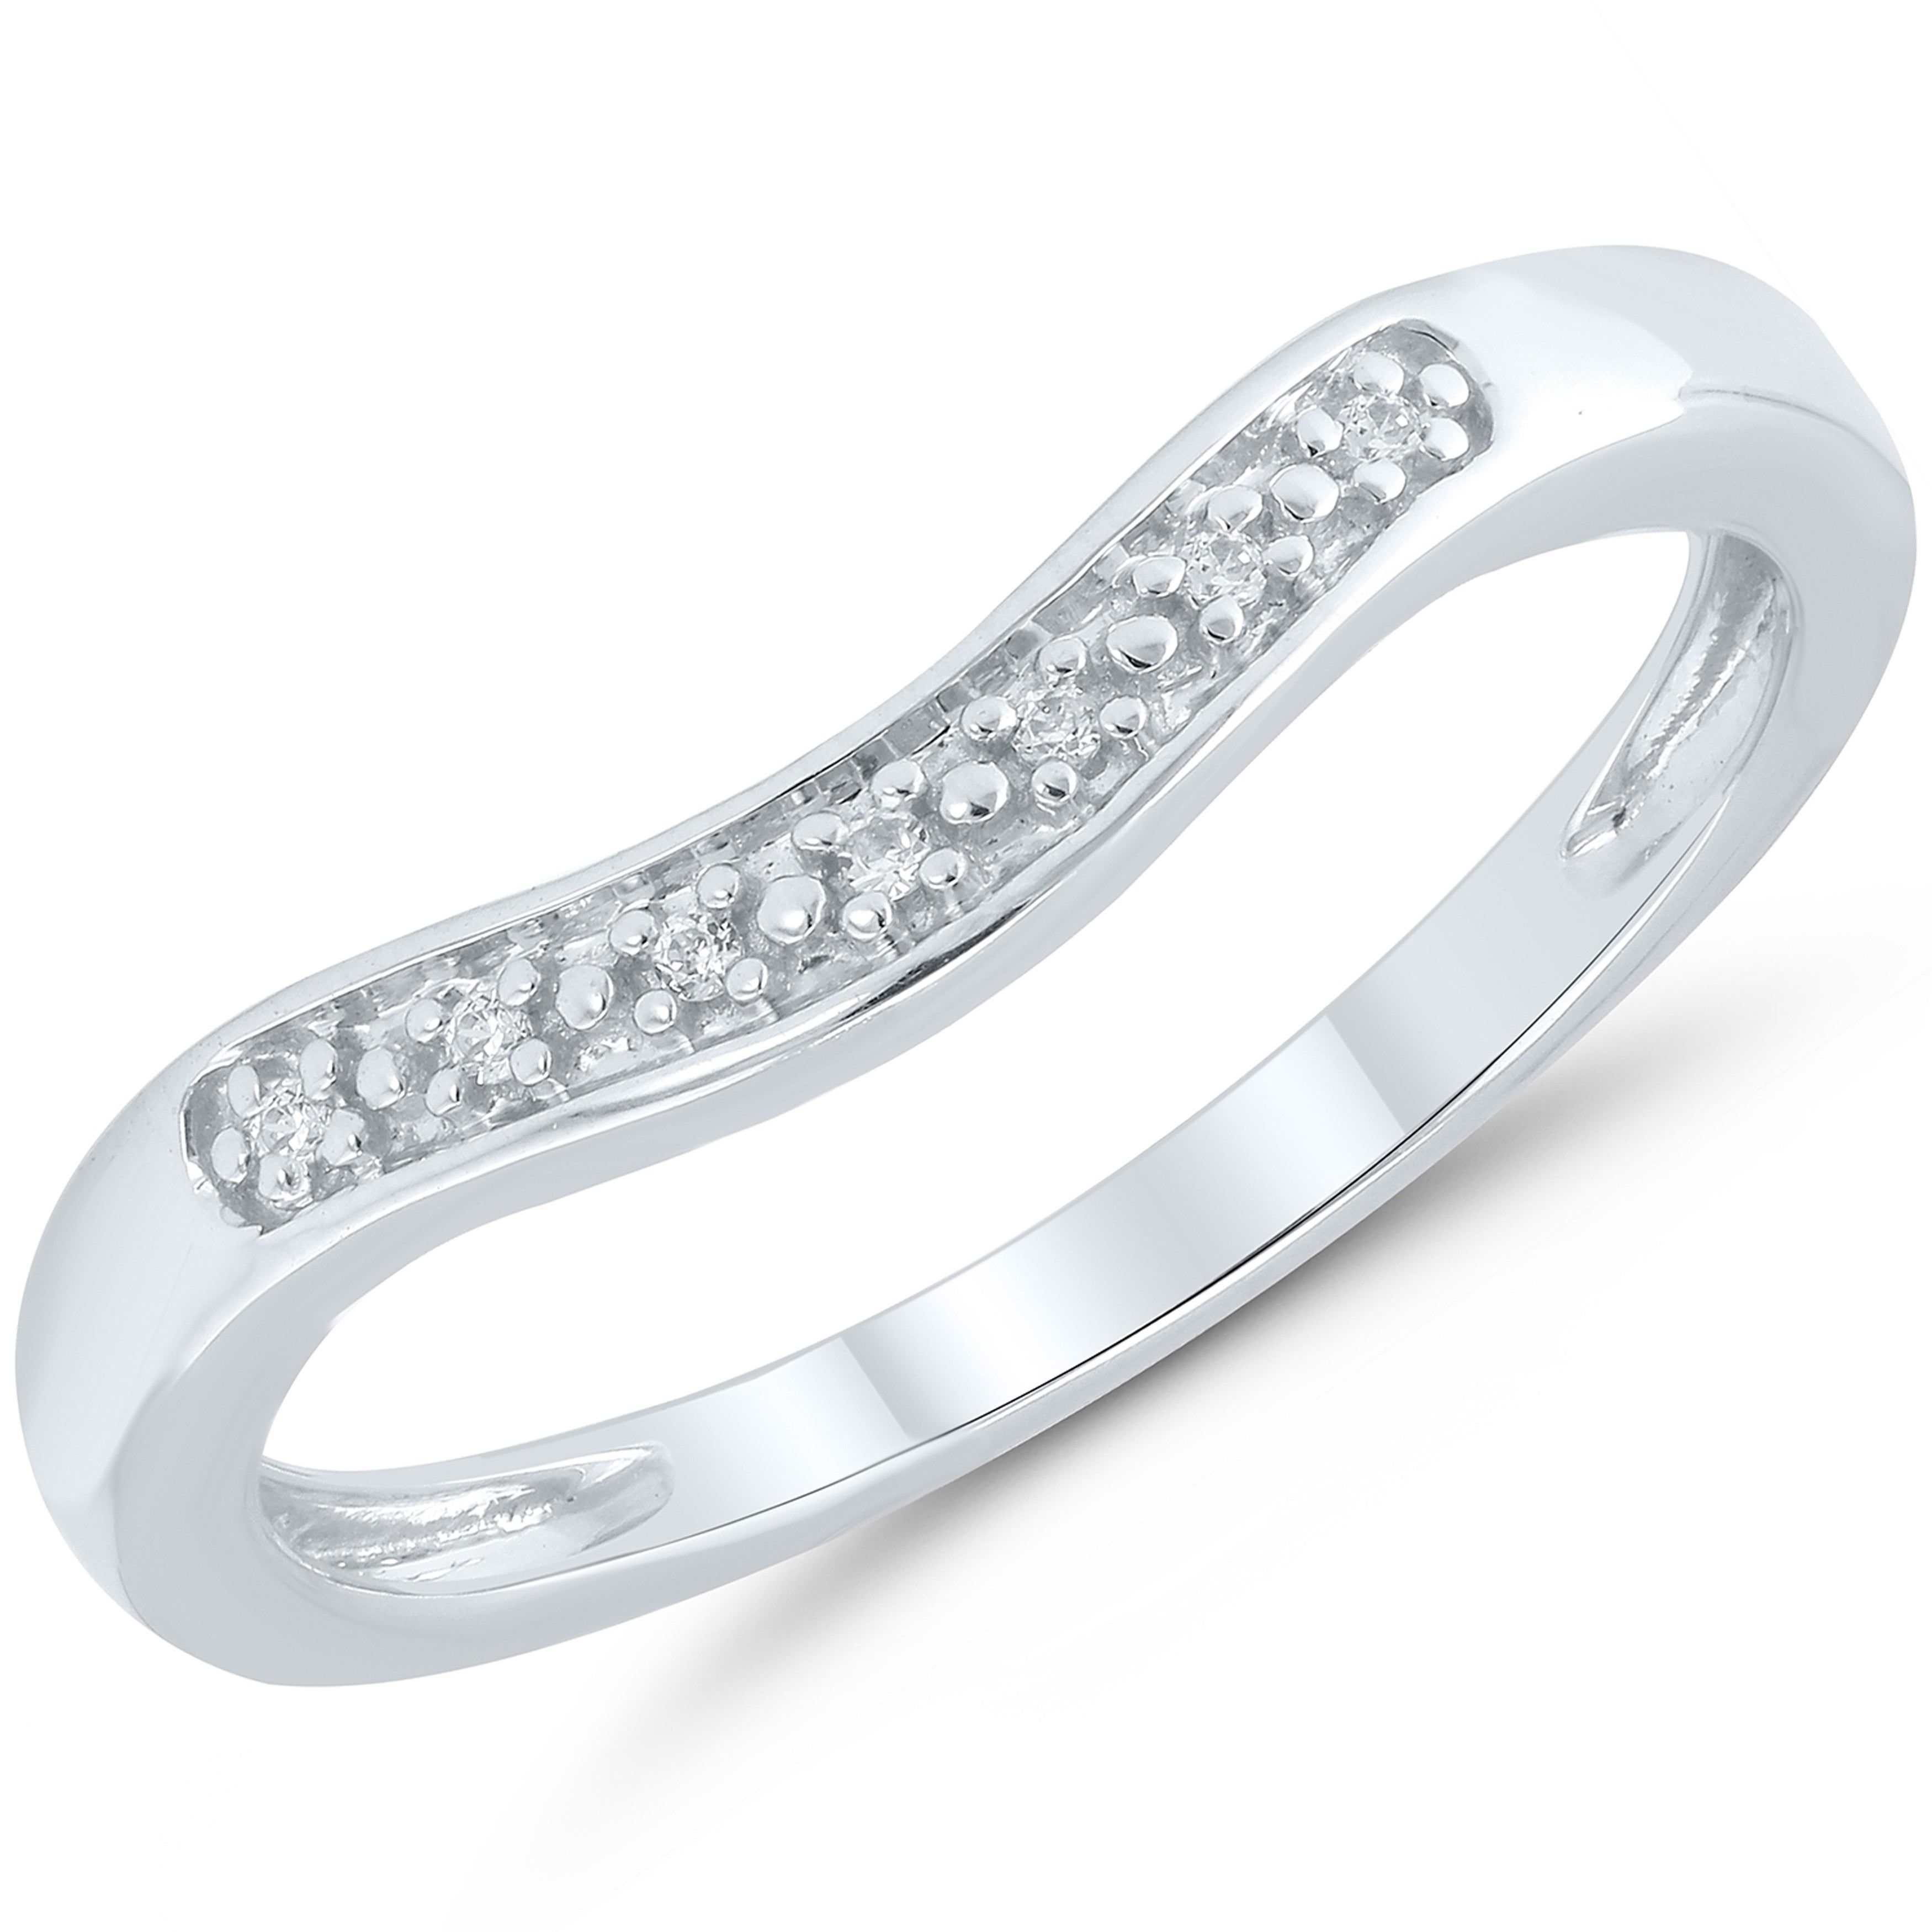 Caressa Sterling Silver Diamond Accent Contour Wedding Band – White H I For Best And Newest Diamond Accent Anniversary Bands In Sterling Silver (View 12 of 25)